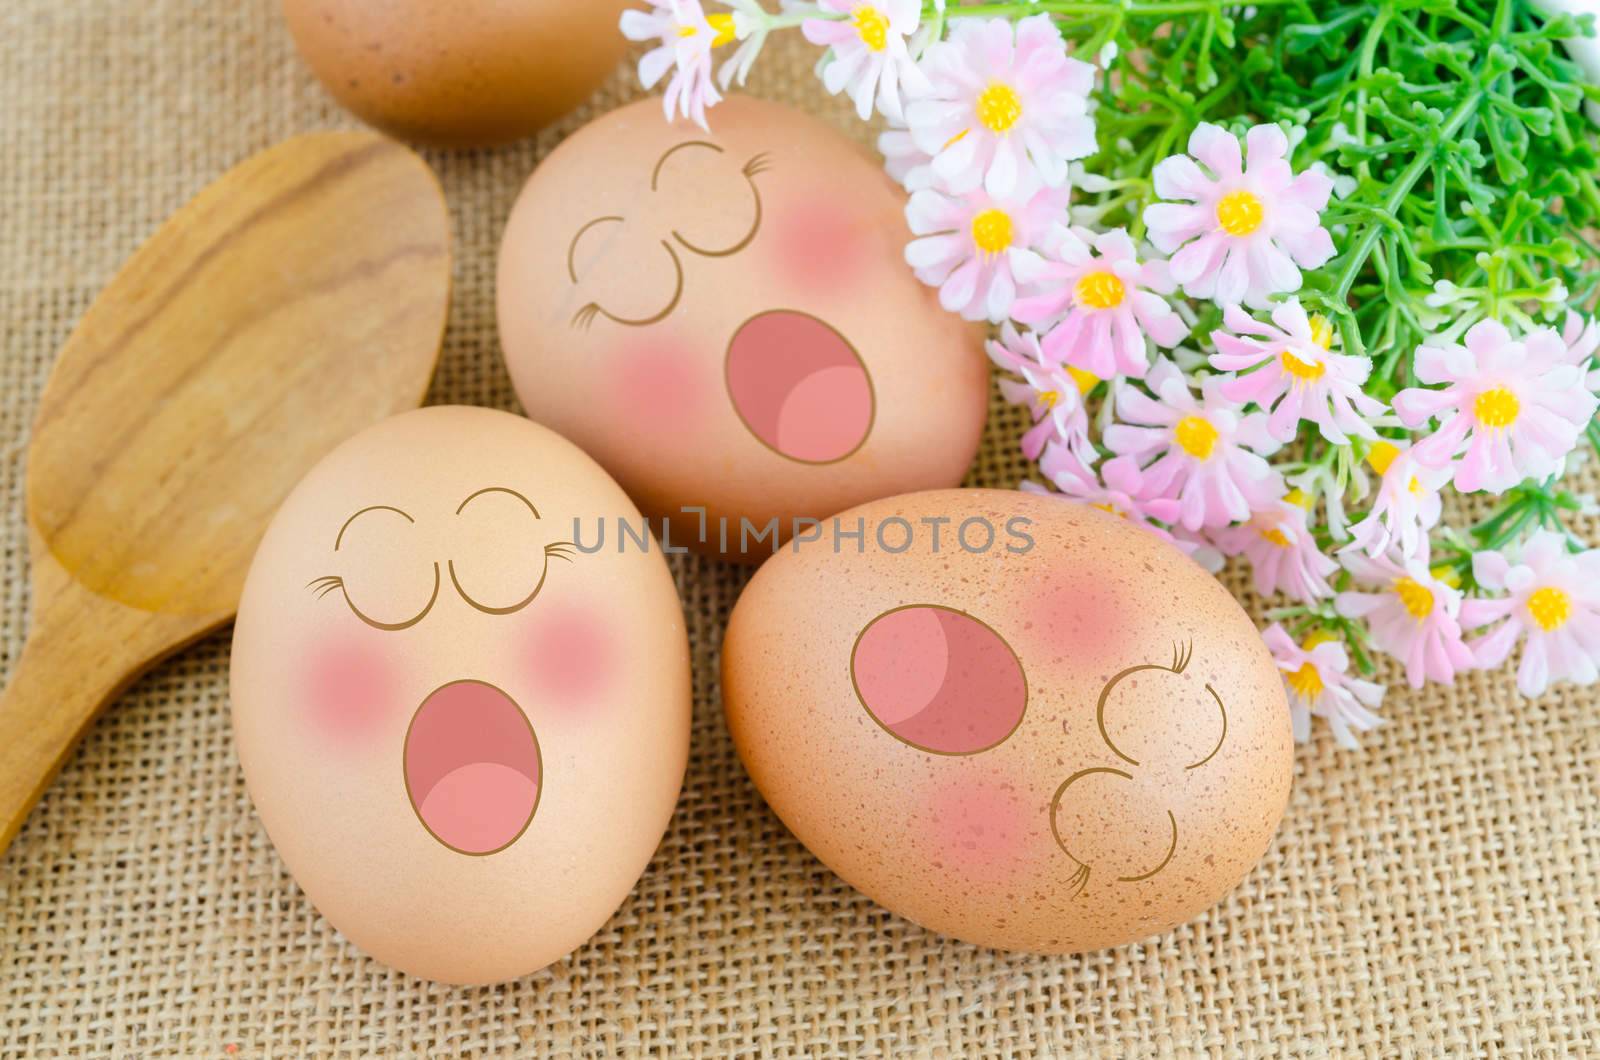 Eggs sleep in Expression Face ans wooden spoon with flower on sack background.